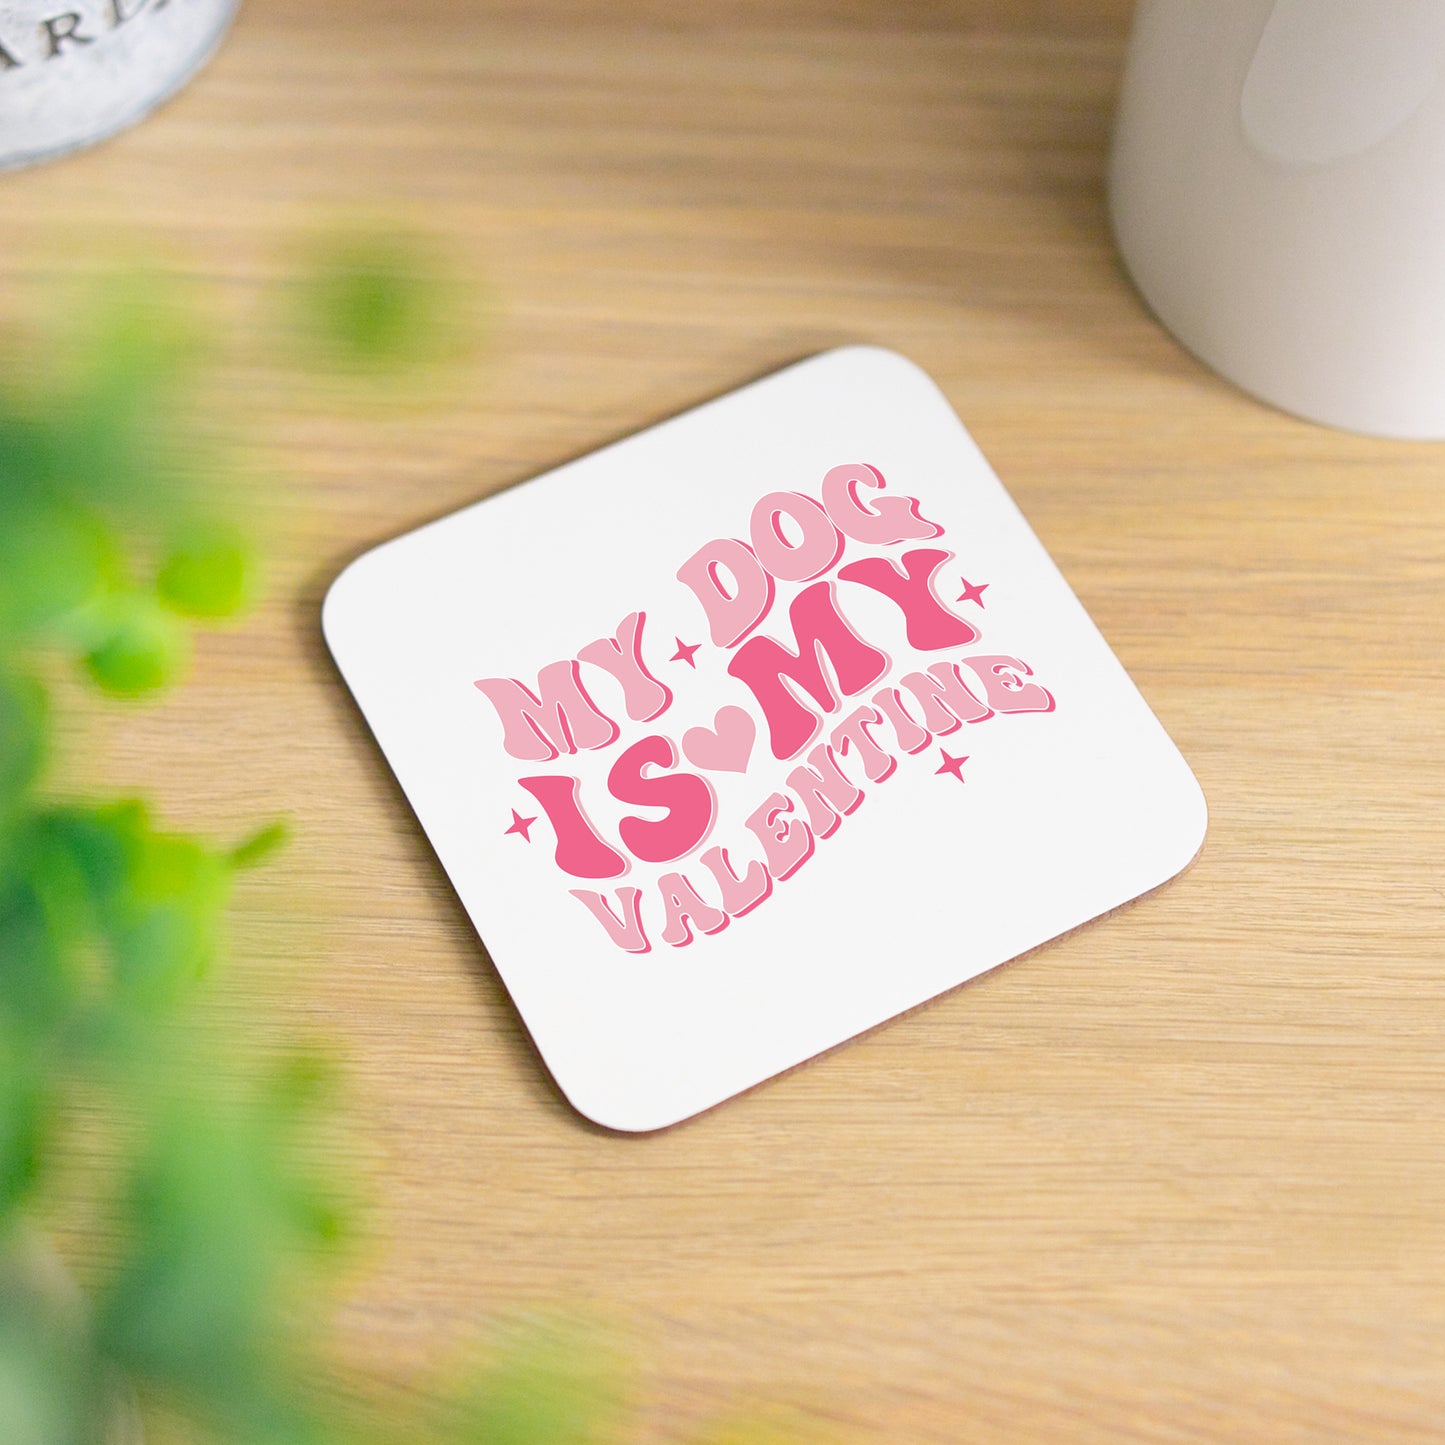 My Dog Is My Valentines Mug and/or Coaster Gift  - Always Looking Good - Coaster On It's Own  